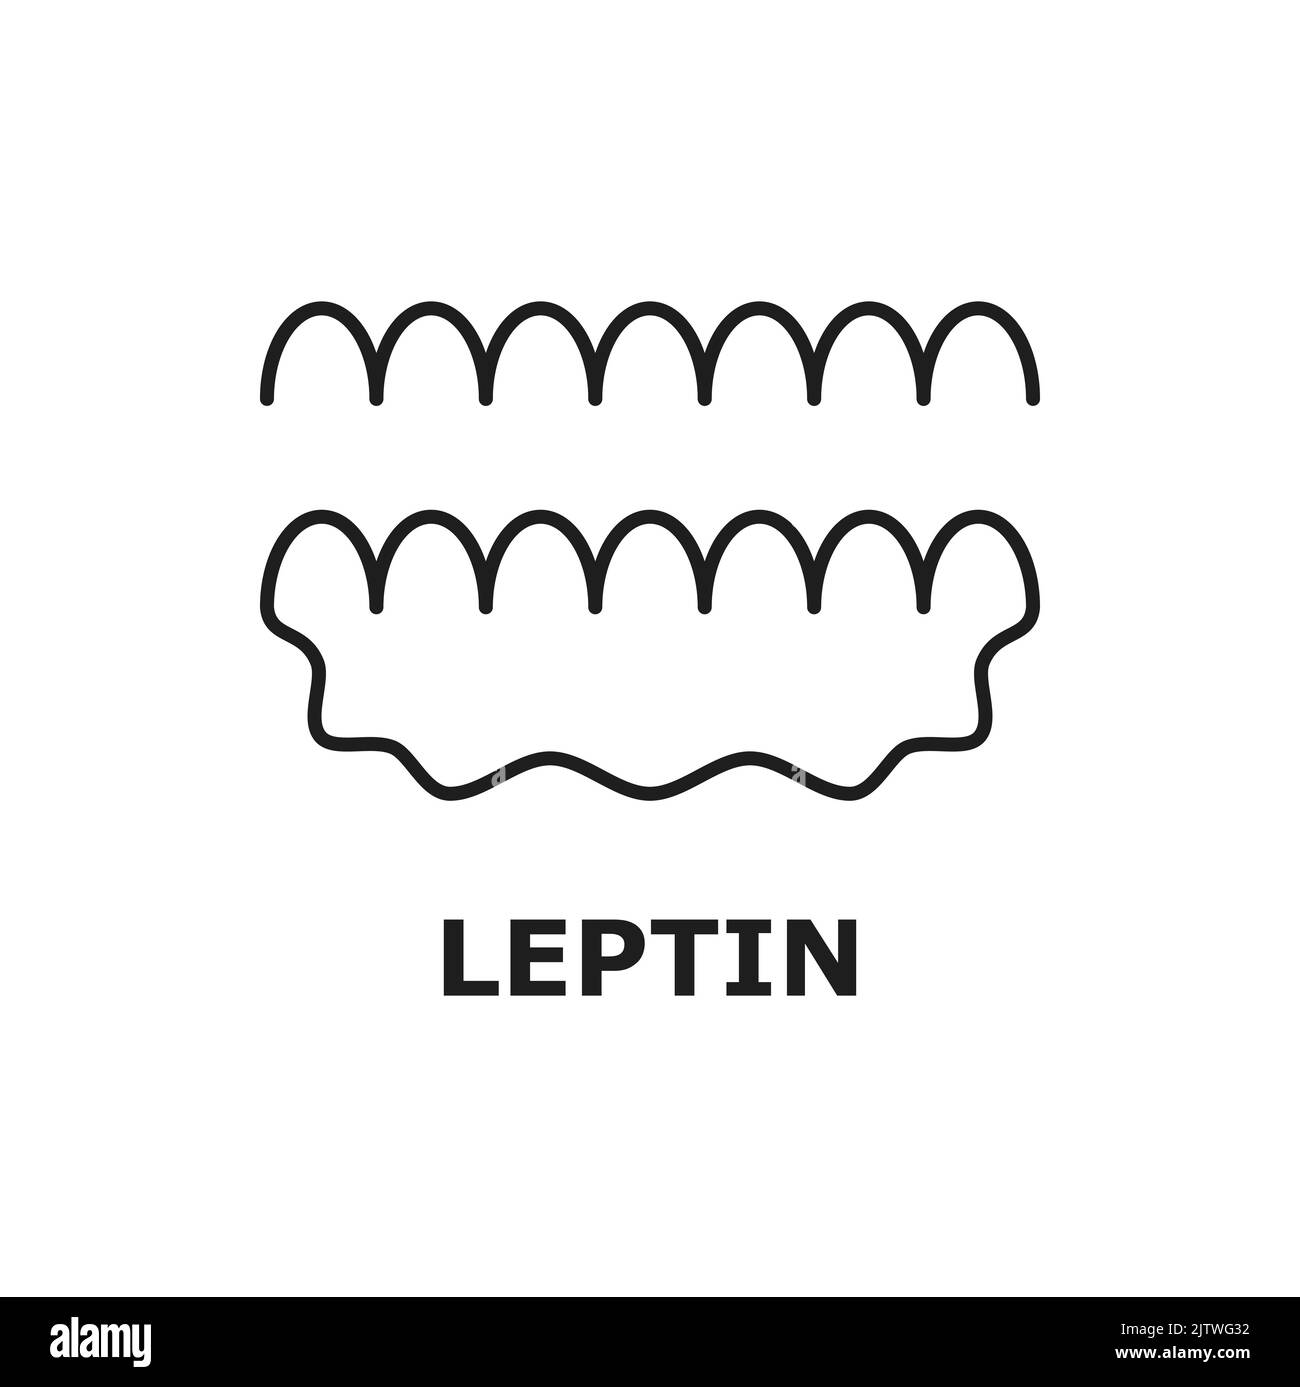 Leptin formula isolated peptide hormone chemical structure thin line icon. Vector symbol for biology, chemistry, naturopathy, medicine. Adipose cells and enterocytes, helps to regulate energy balance Stock Vector